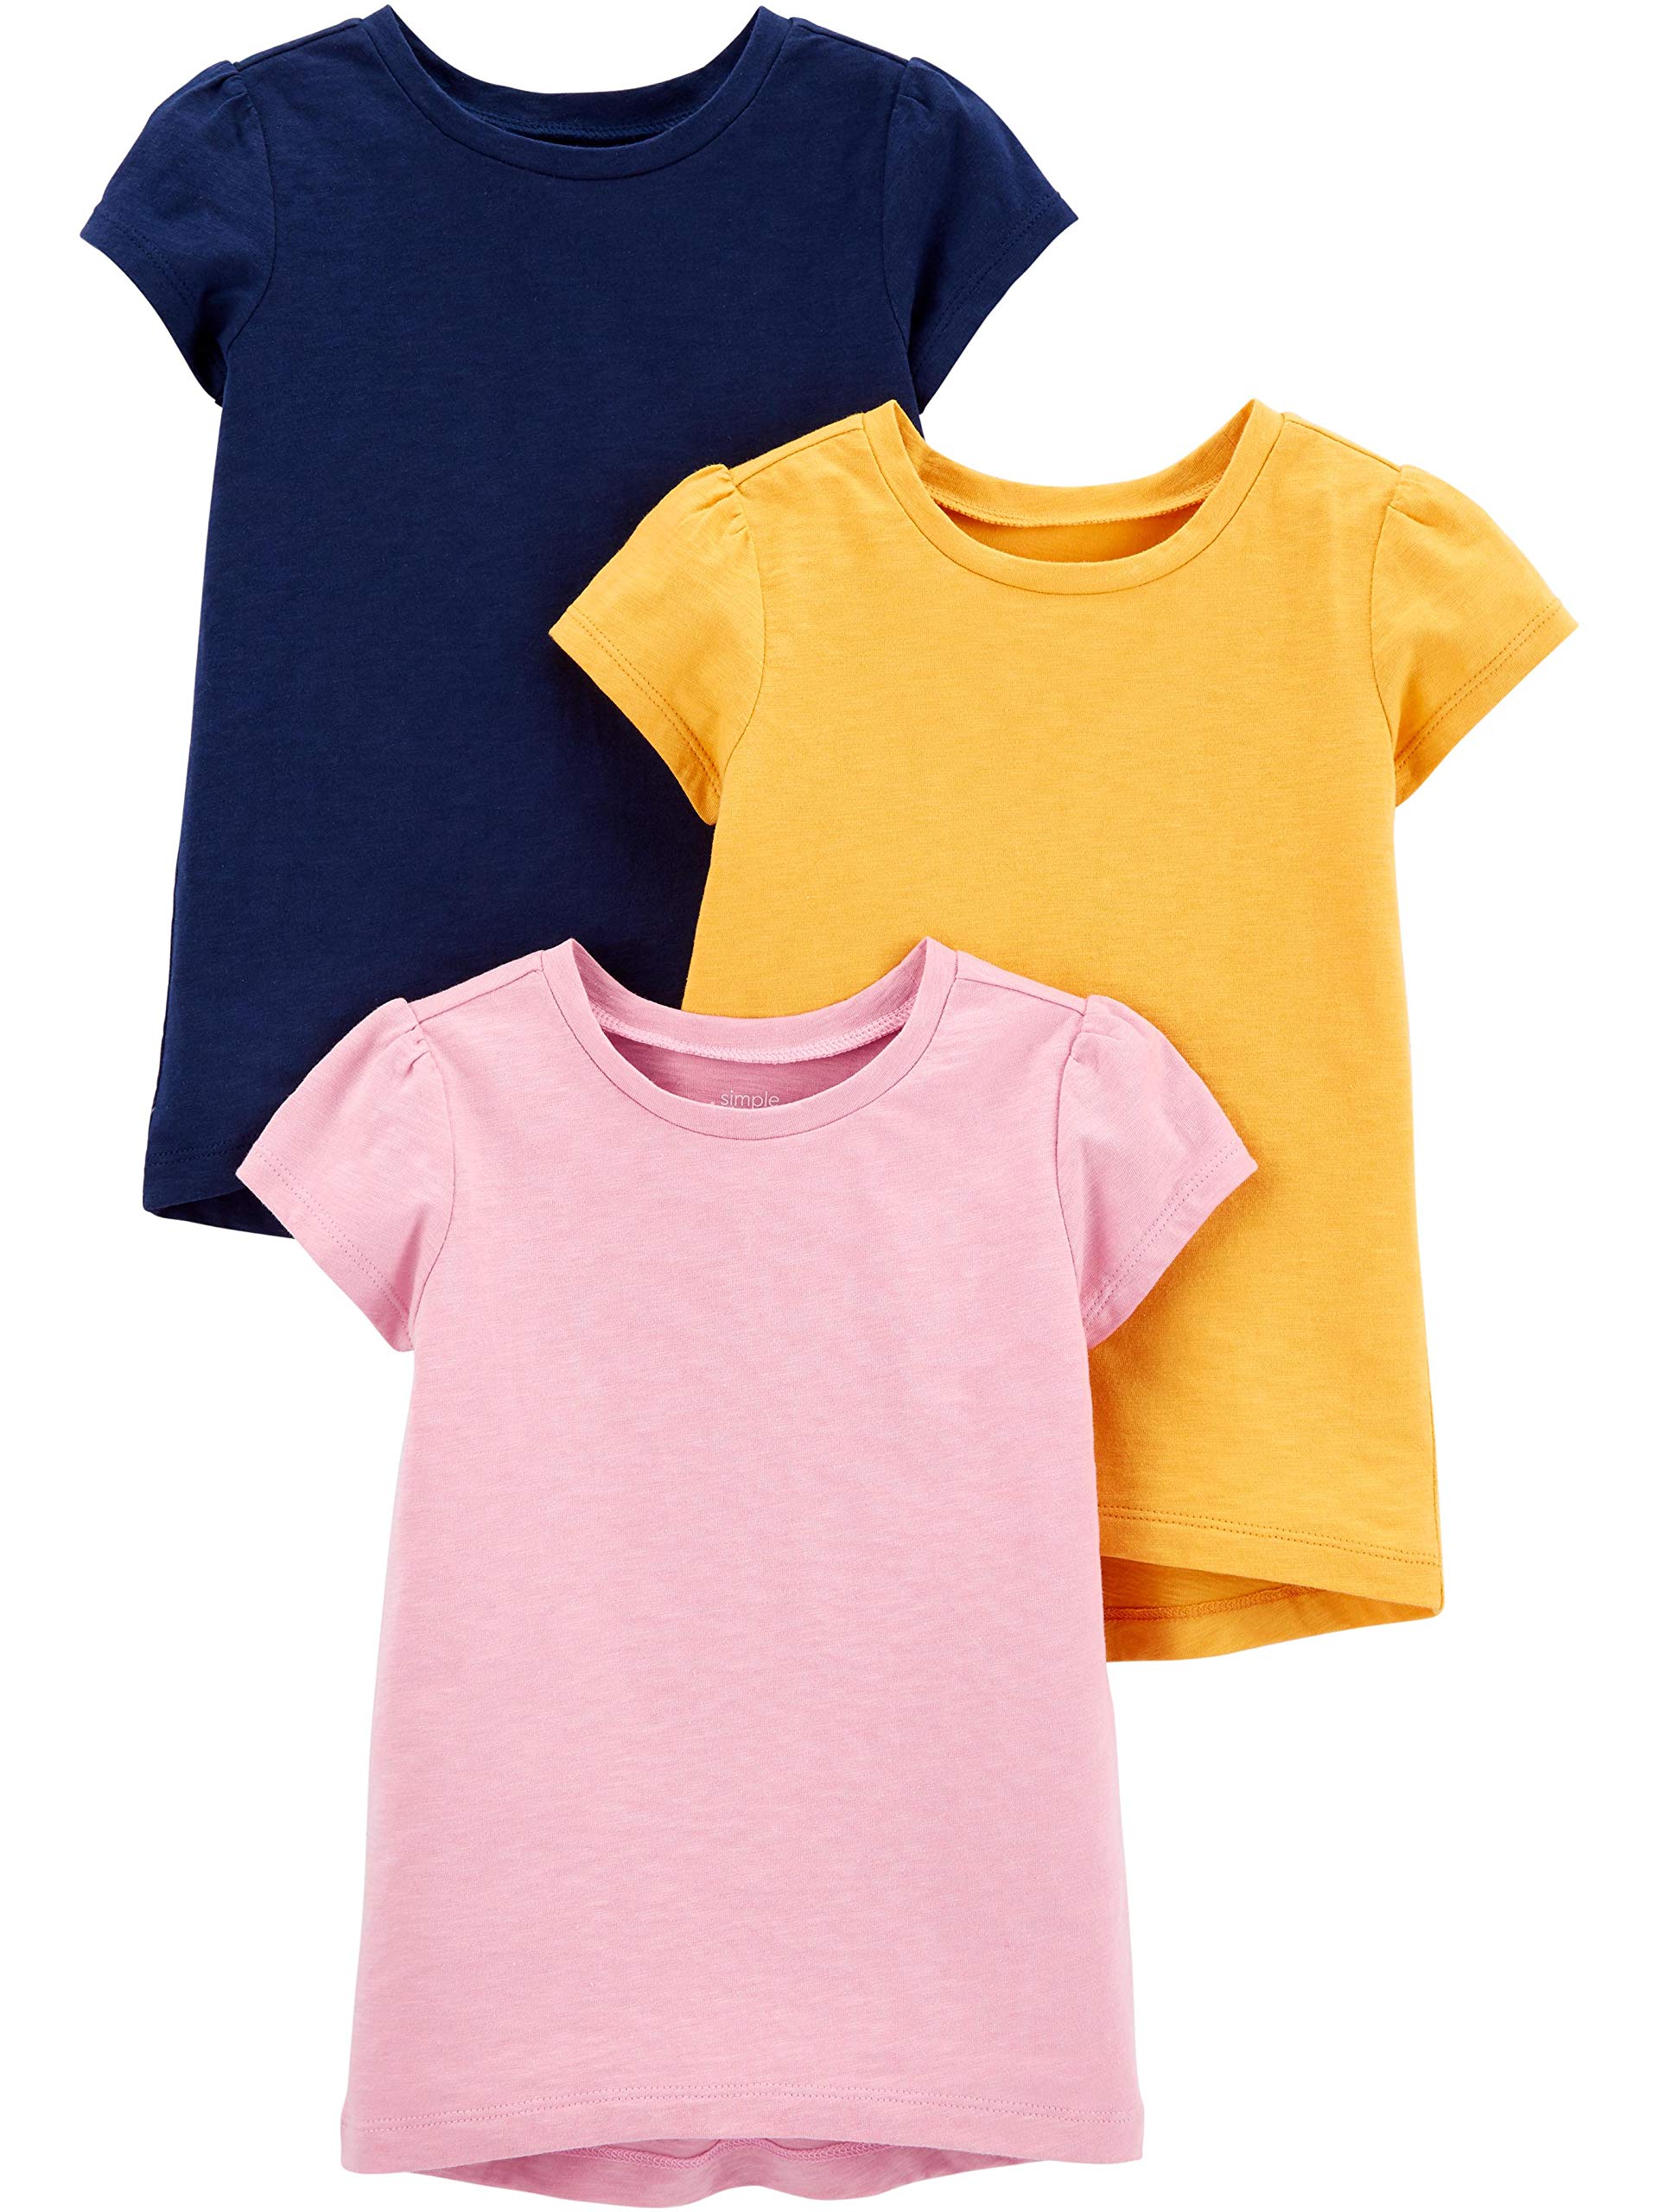 Simple Joys by Carter's Toddler Girls' Short-Sleeve Shirts and Tops, Pack of 3